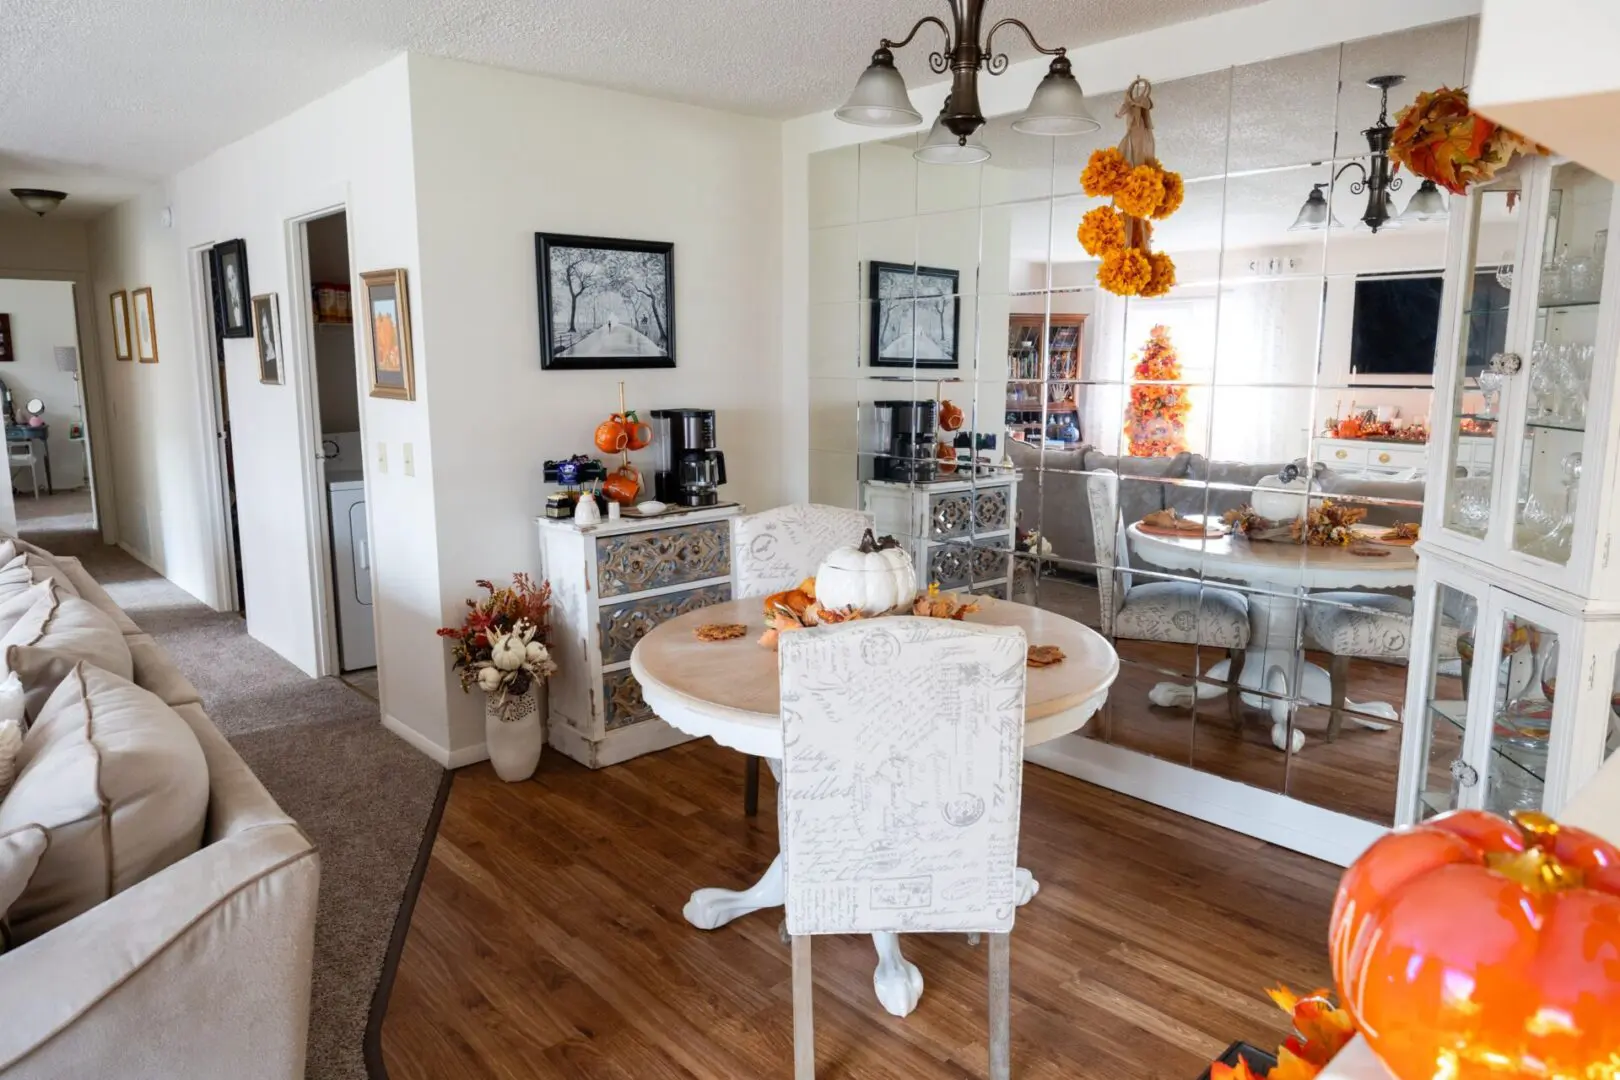 A dining room with white table and chairs, orange decorations.